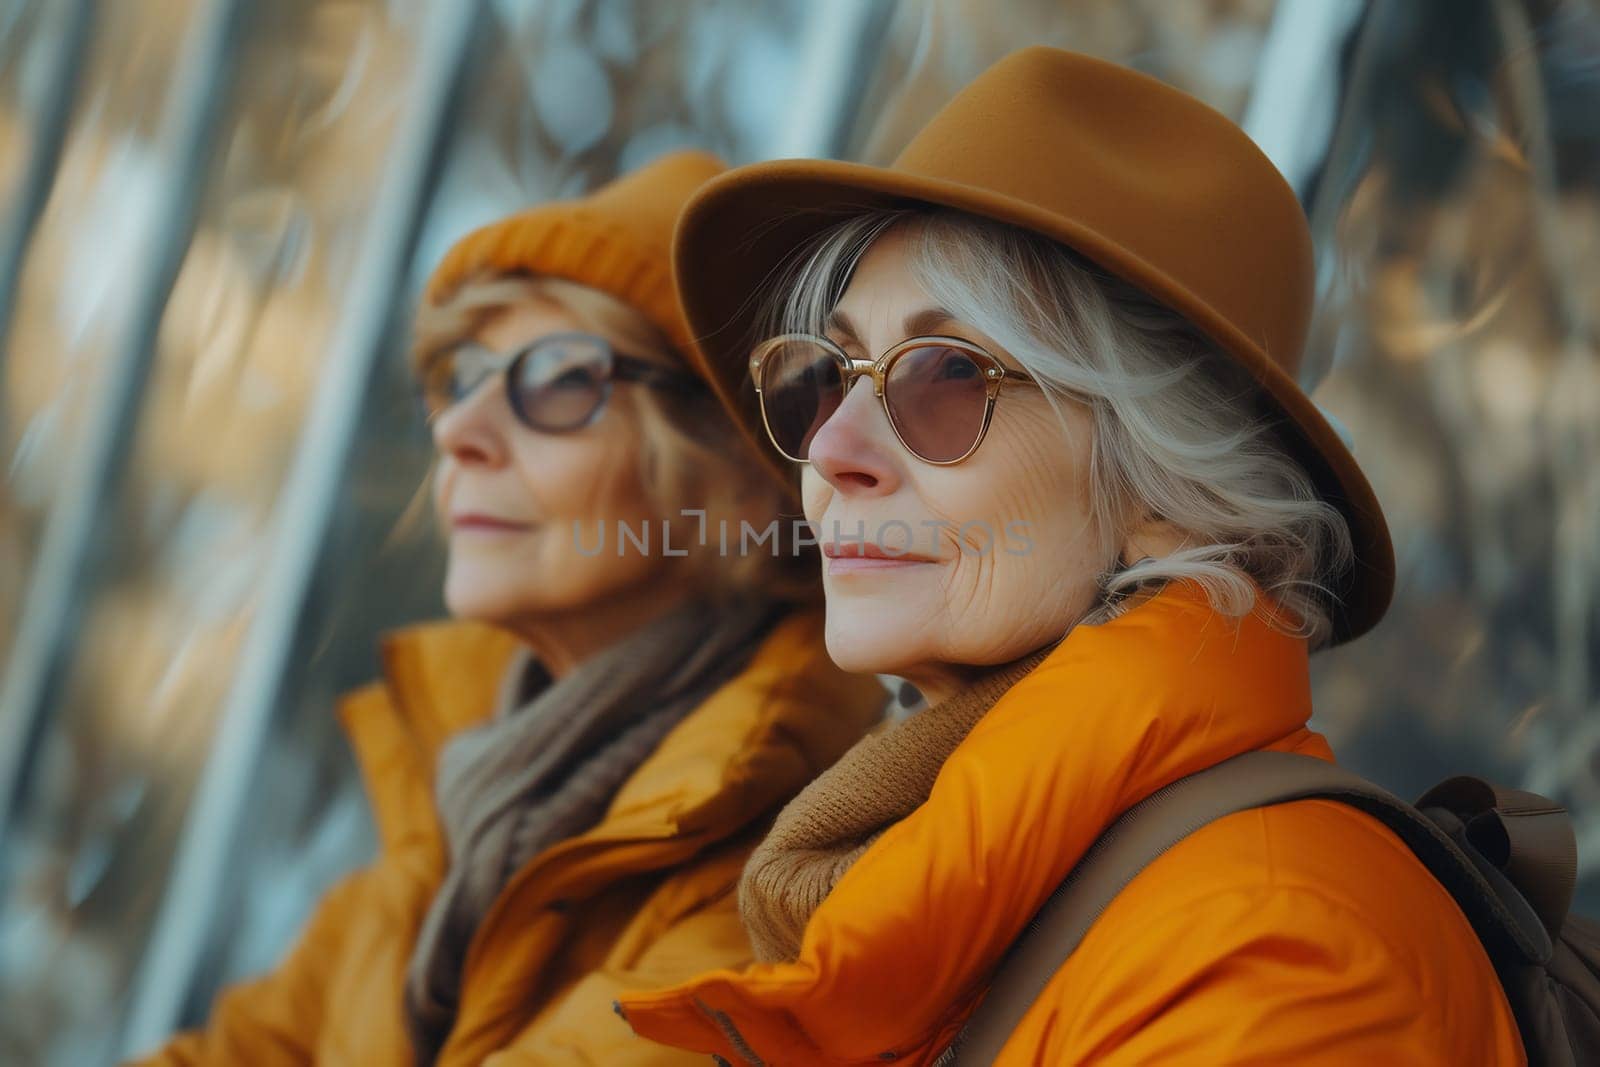 senior women on outdoor adventure, in the style of translucent planes, romantic scenery by Andelov13